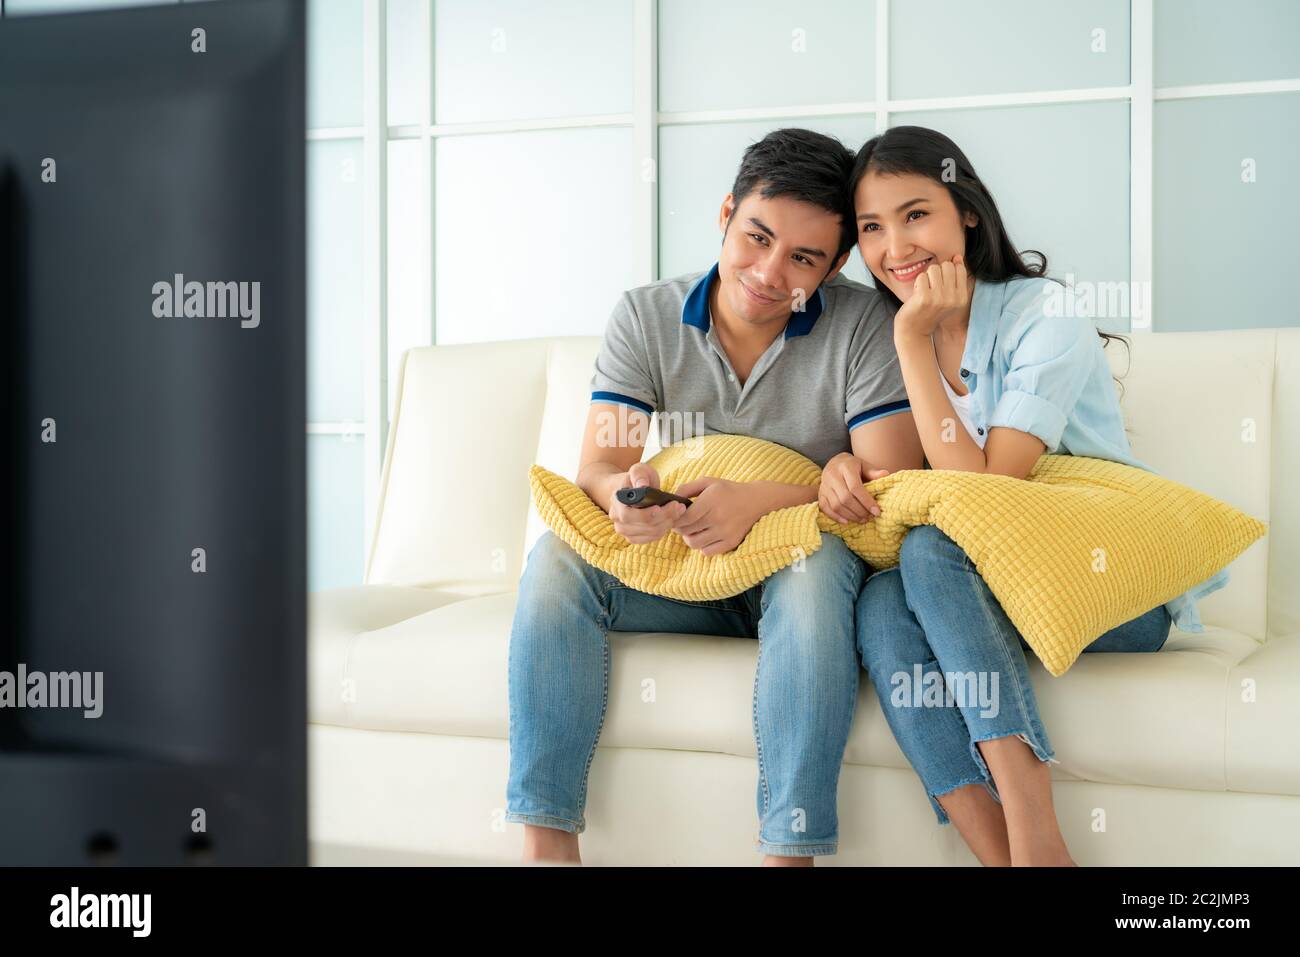 Asian happy fcouple sitting in sofa and watching television at home concept of family values, vacation day, holiday, happiness or lifestyle. Stock Photo